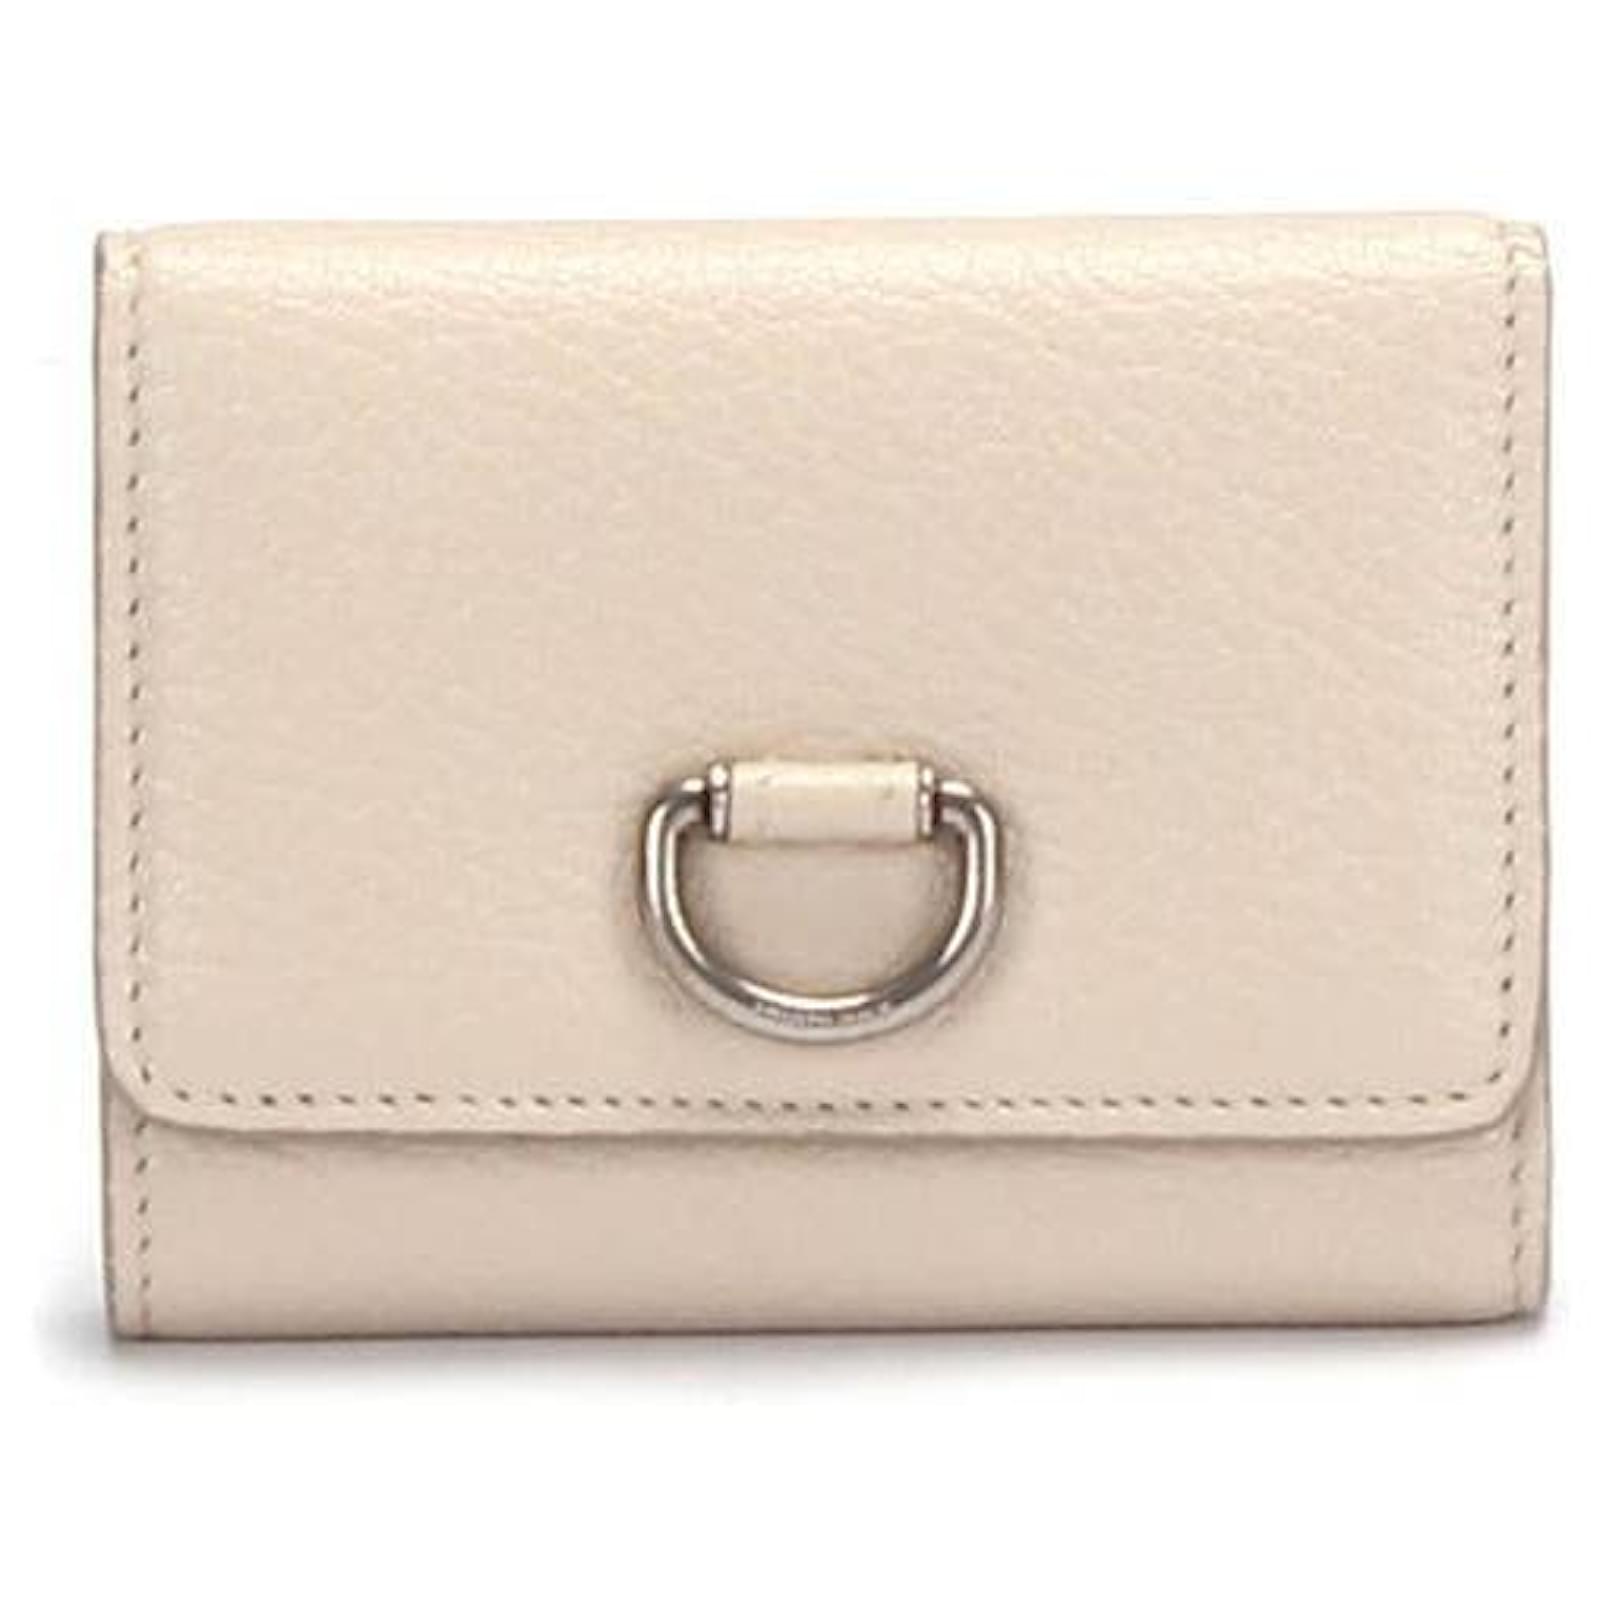 Burberry D-Ring Leather Small Wallet in white calf leather leather   - Joli Closet